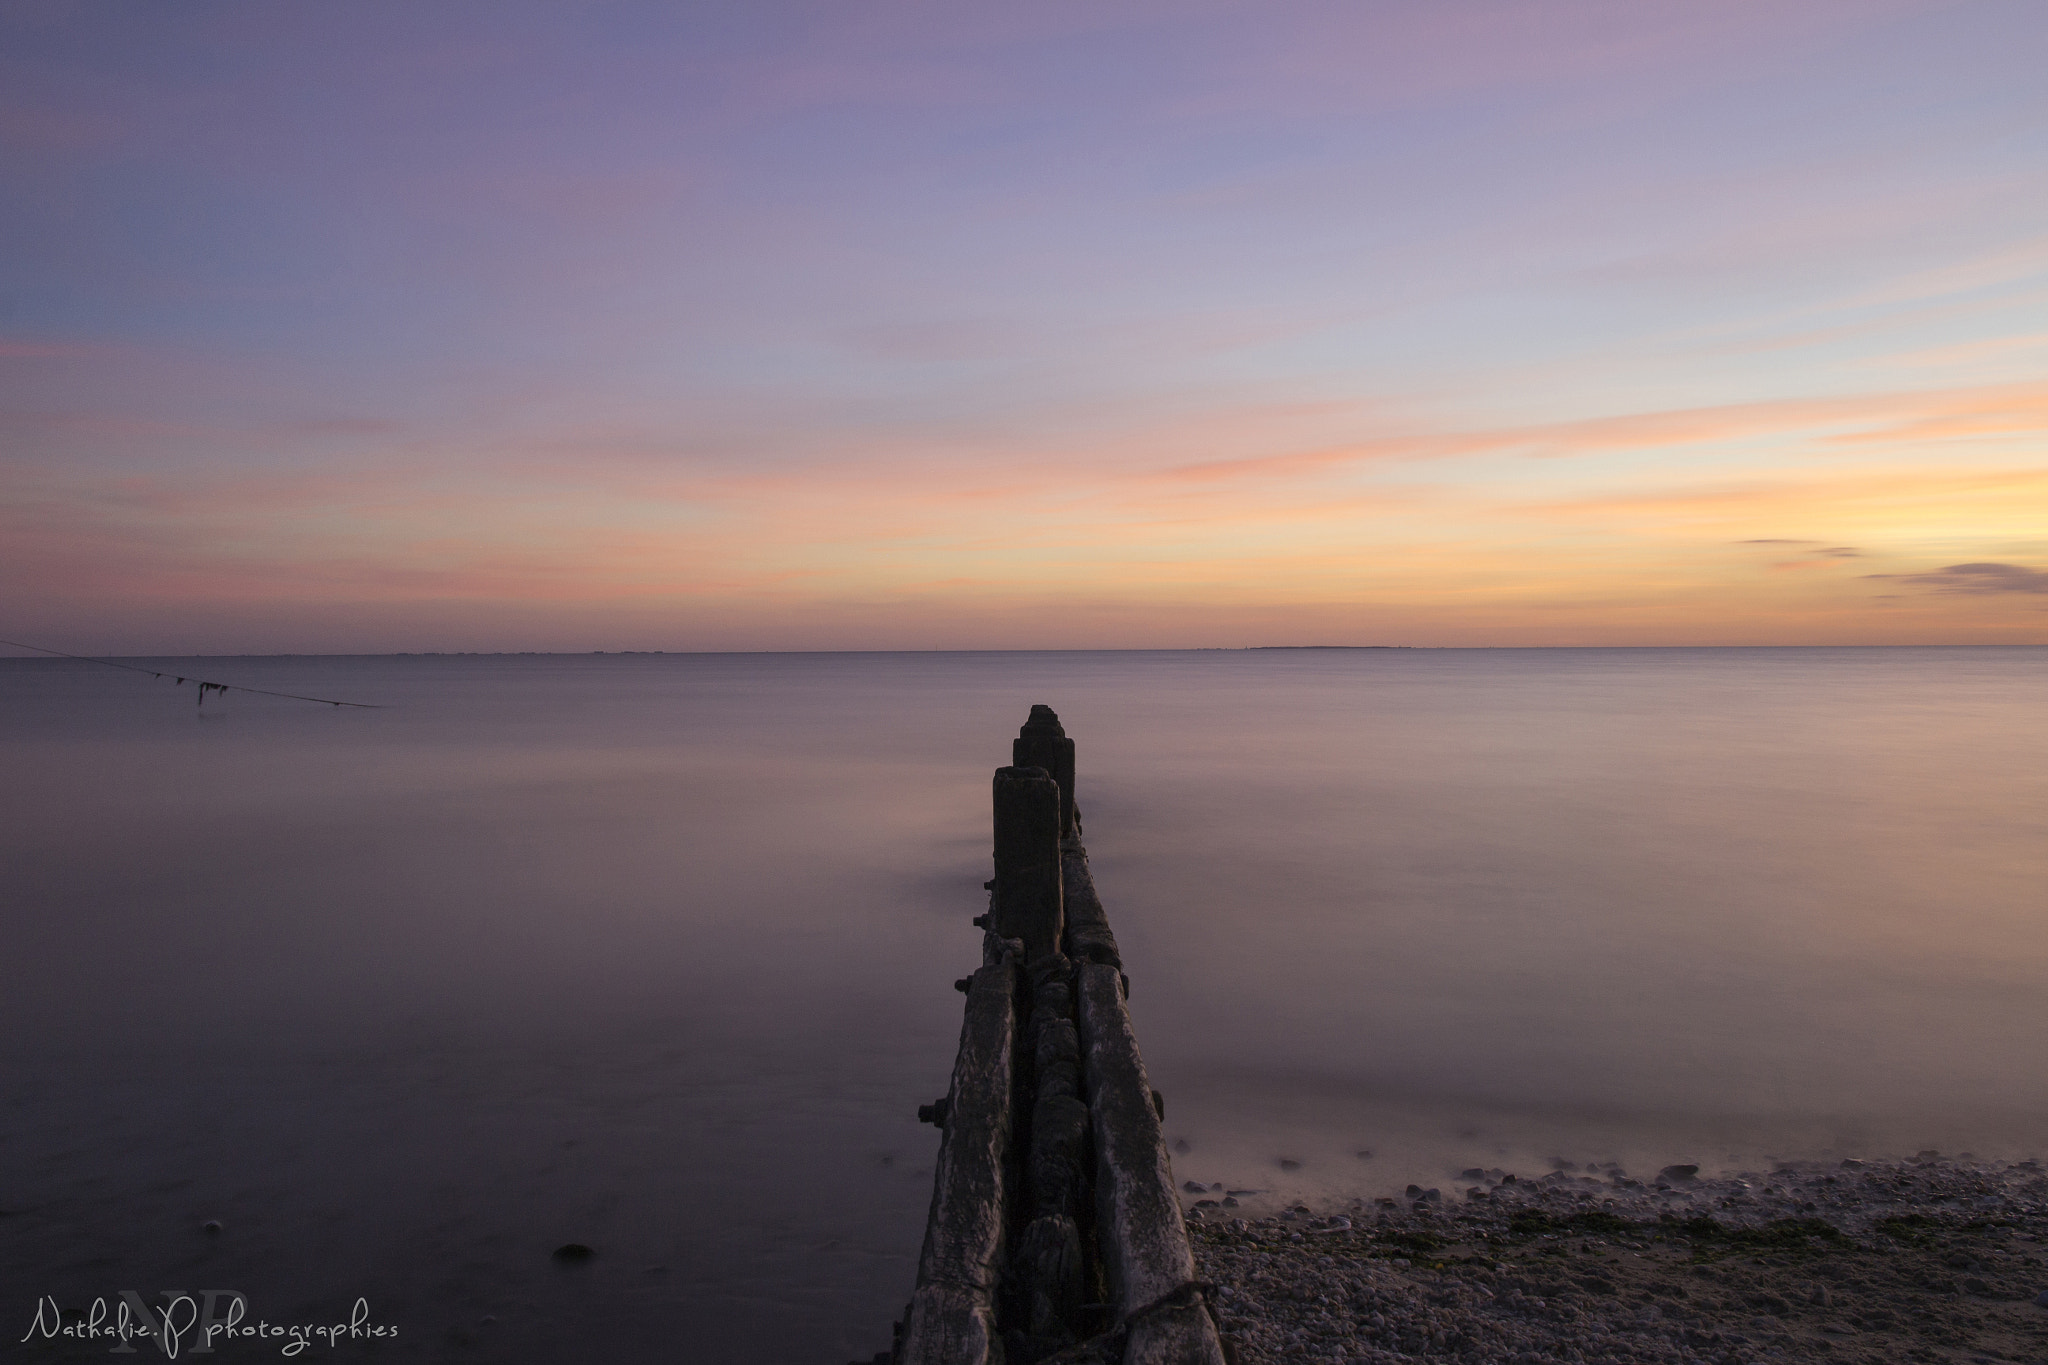 Canon EOS 700D (EOS Rebel T5i / EOS Kiss X7i) + Sigma 17-70mm F2.8-4 DC Macro OS HSM | C sample photo. Long exposure sunset photography